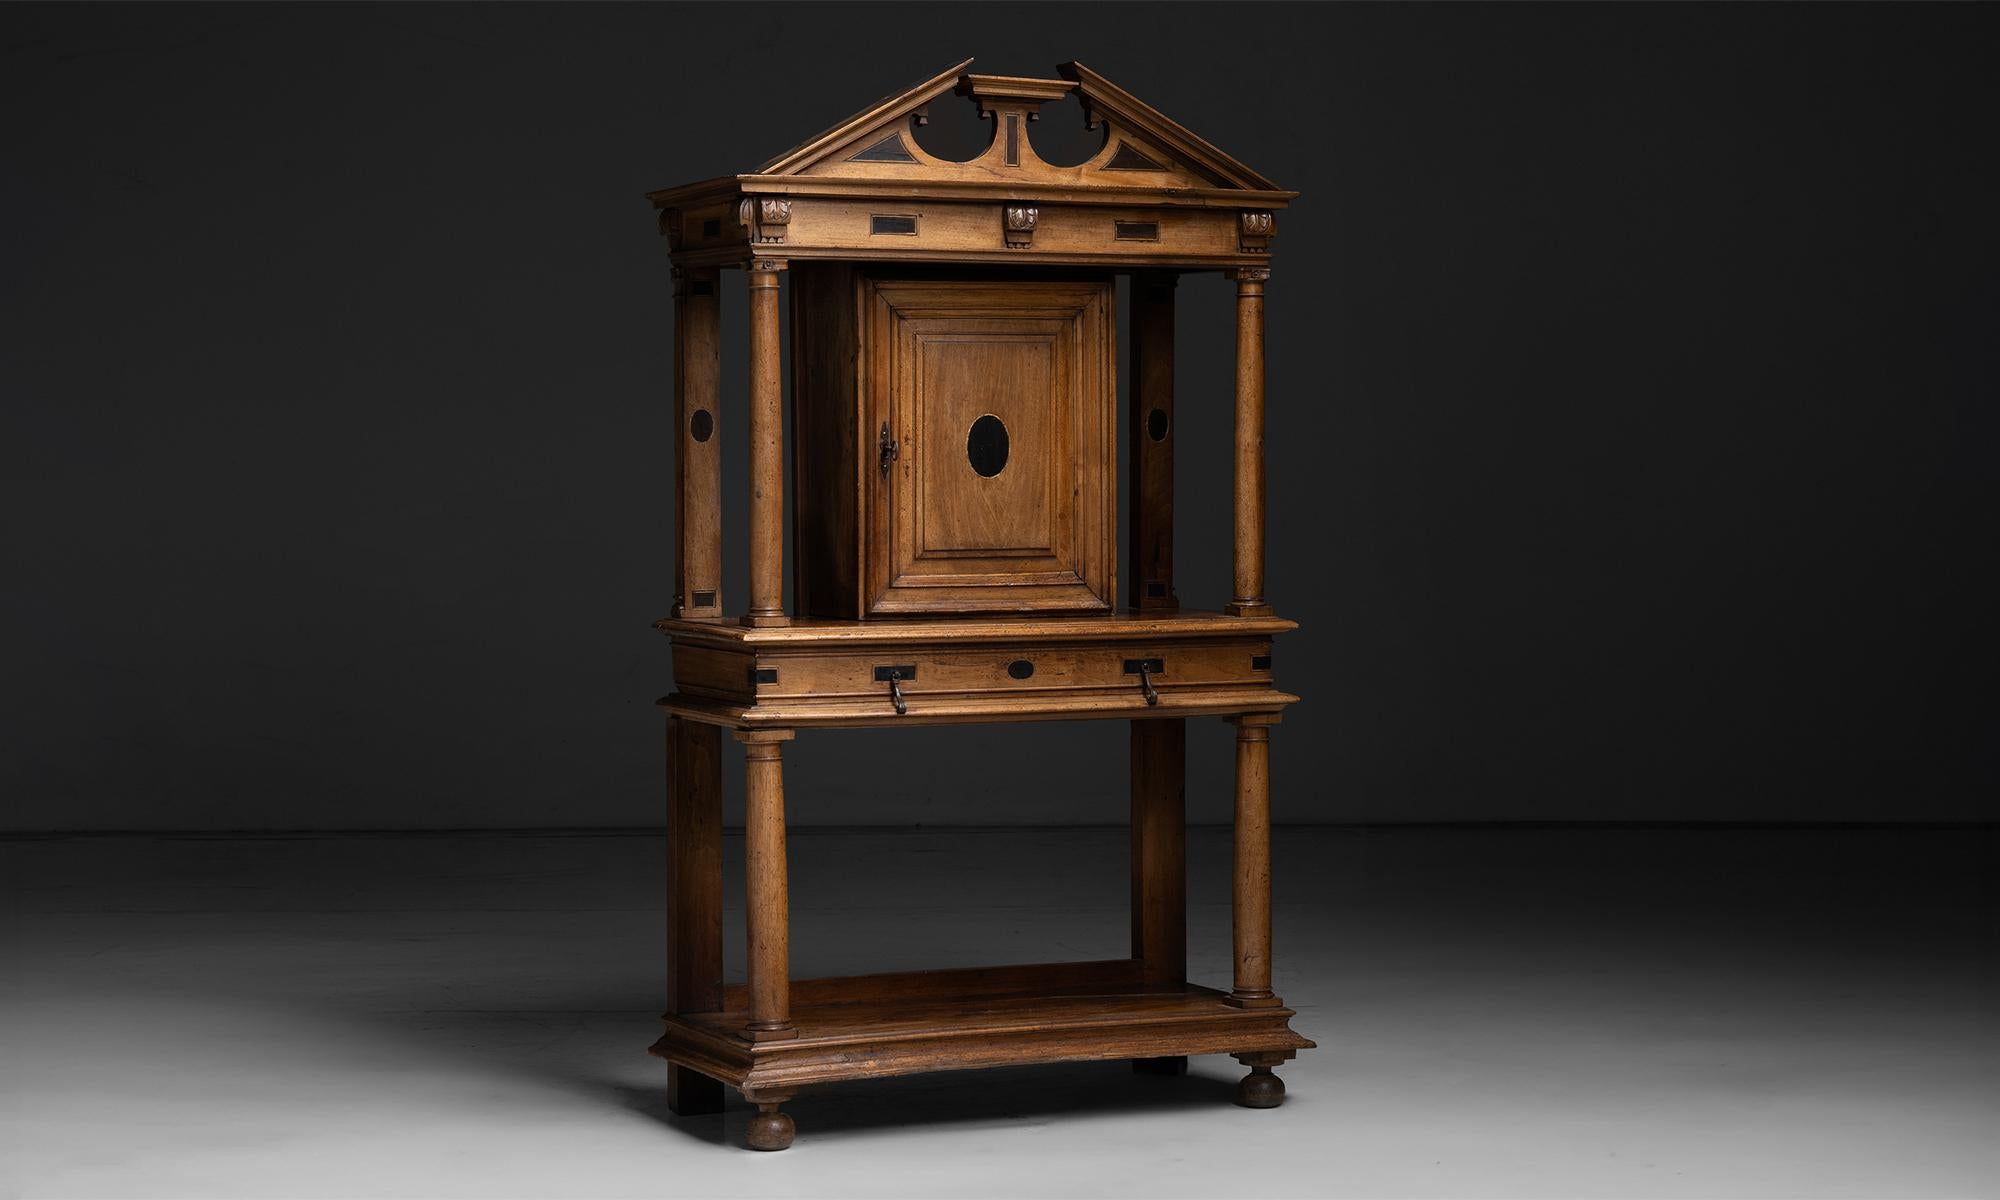 Palladian Cabinet

England circa 1870

Walnut single drawer cabinet with detailed carving, wrought iron hardware

42.5”w x 18.25”d x 74.25”h